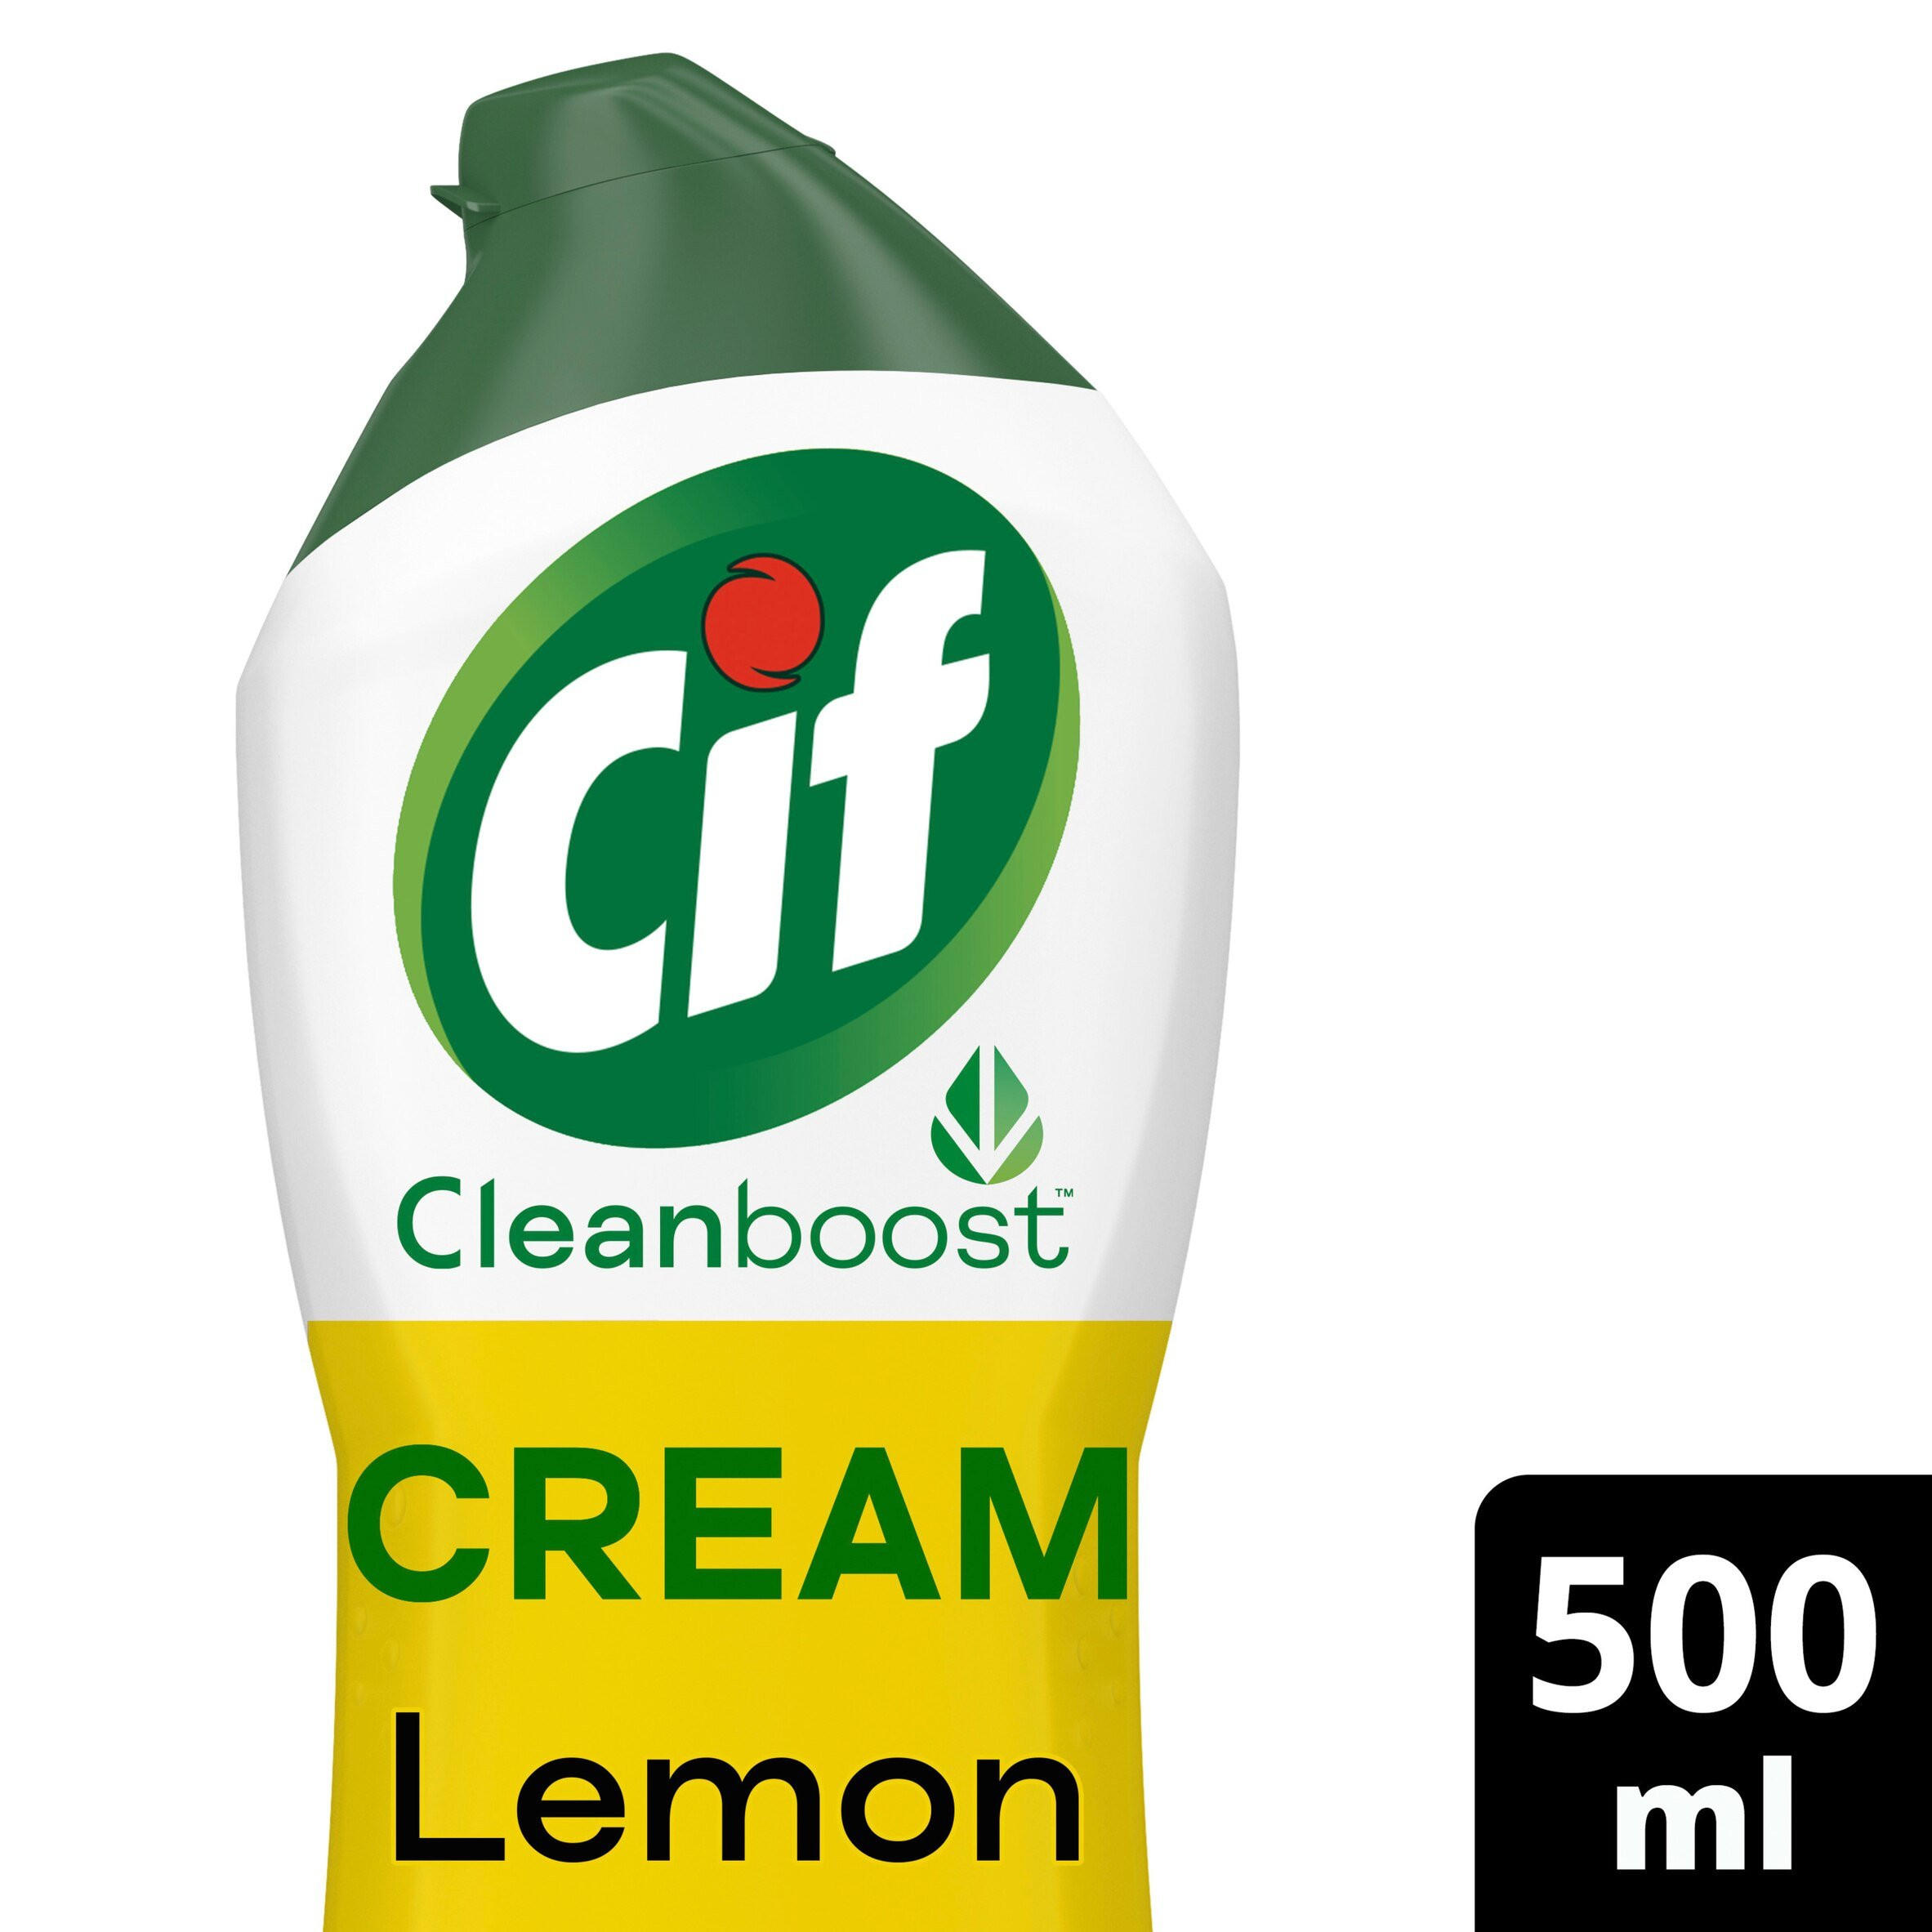 Cif Cream Cleaner Lemon 500 ml, Cleaning Products